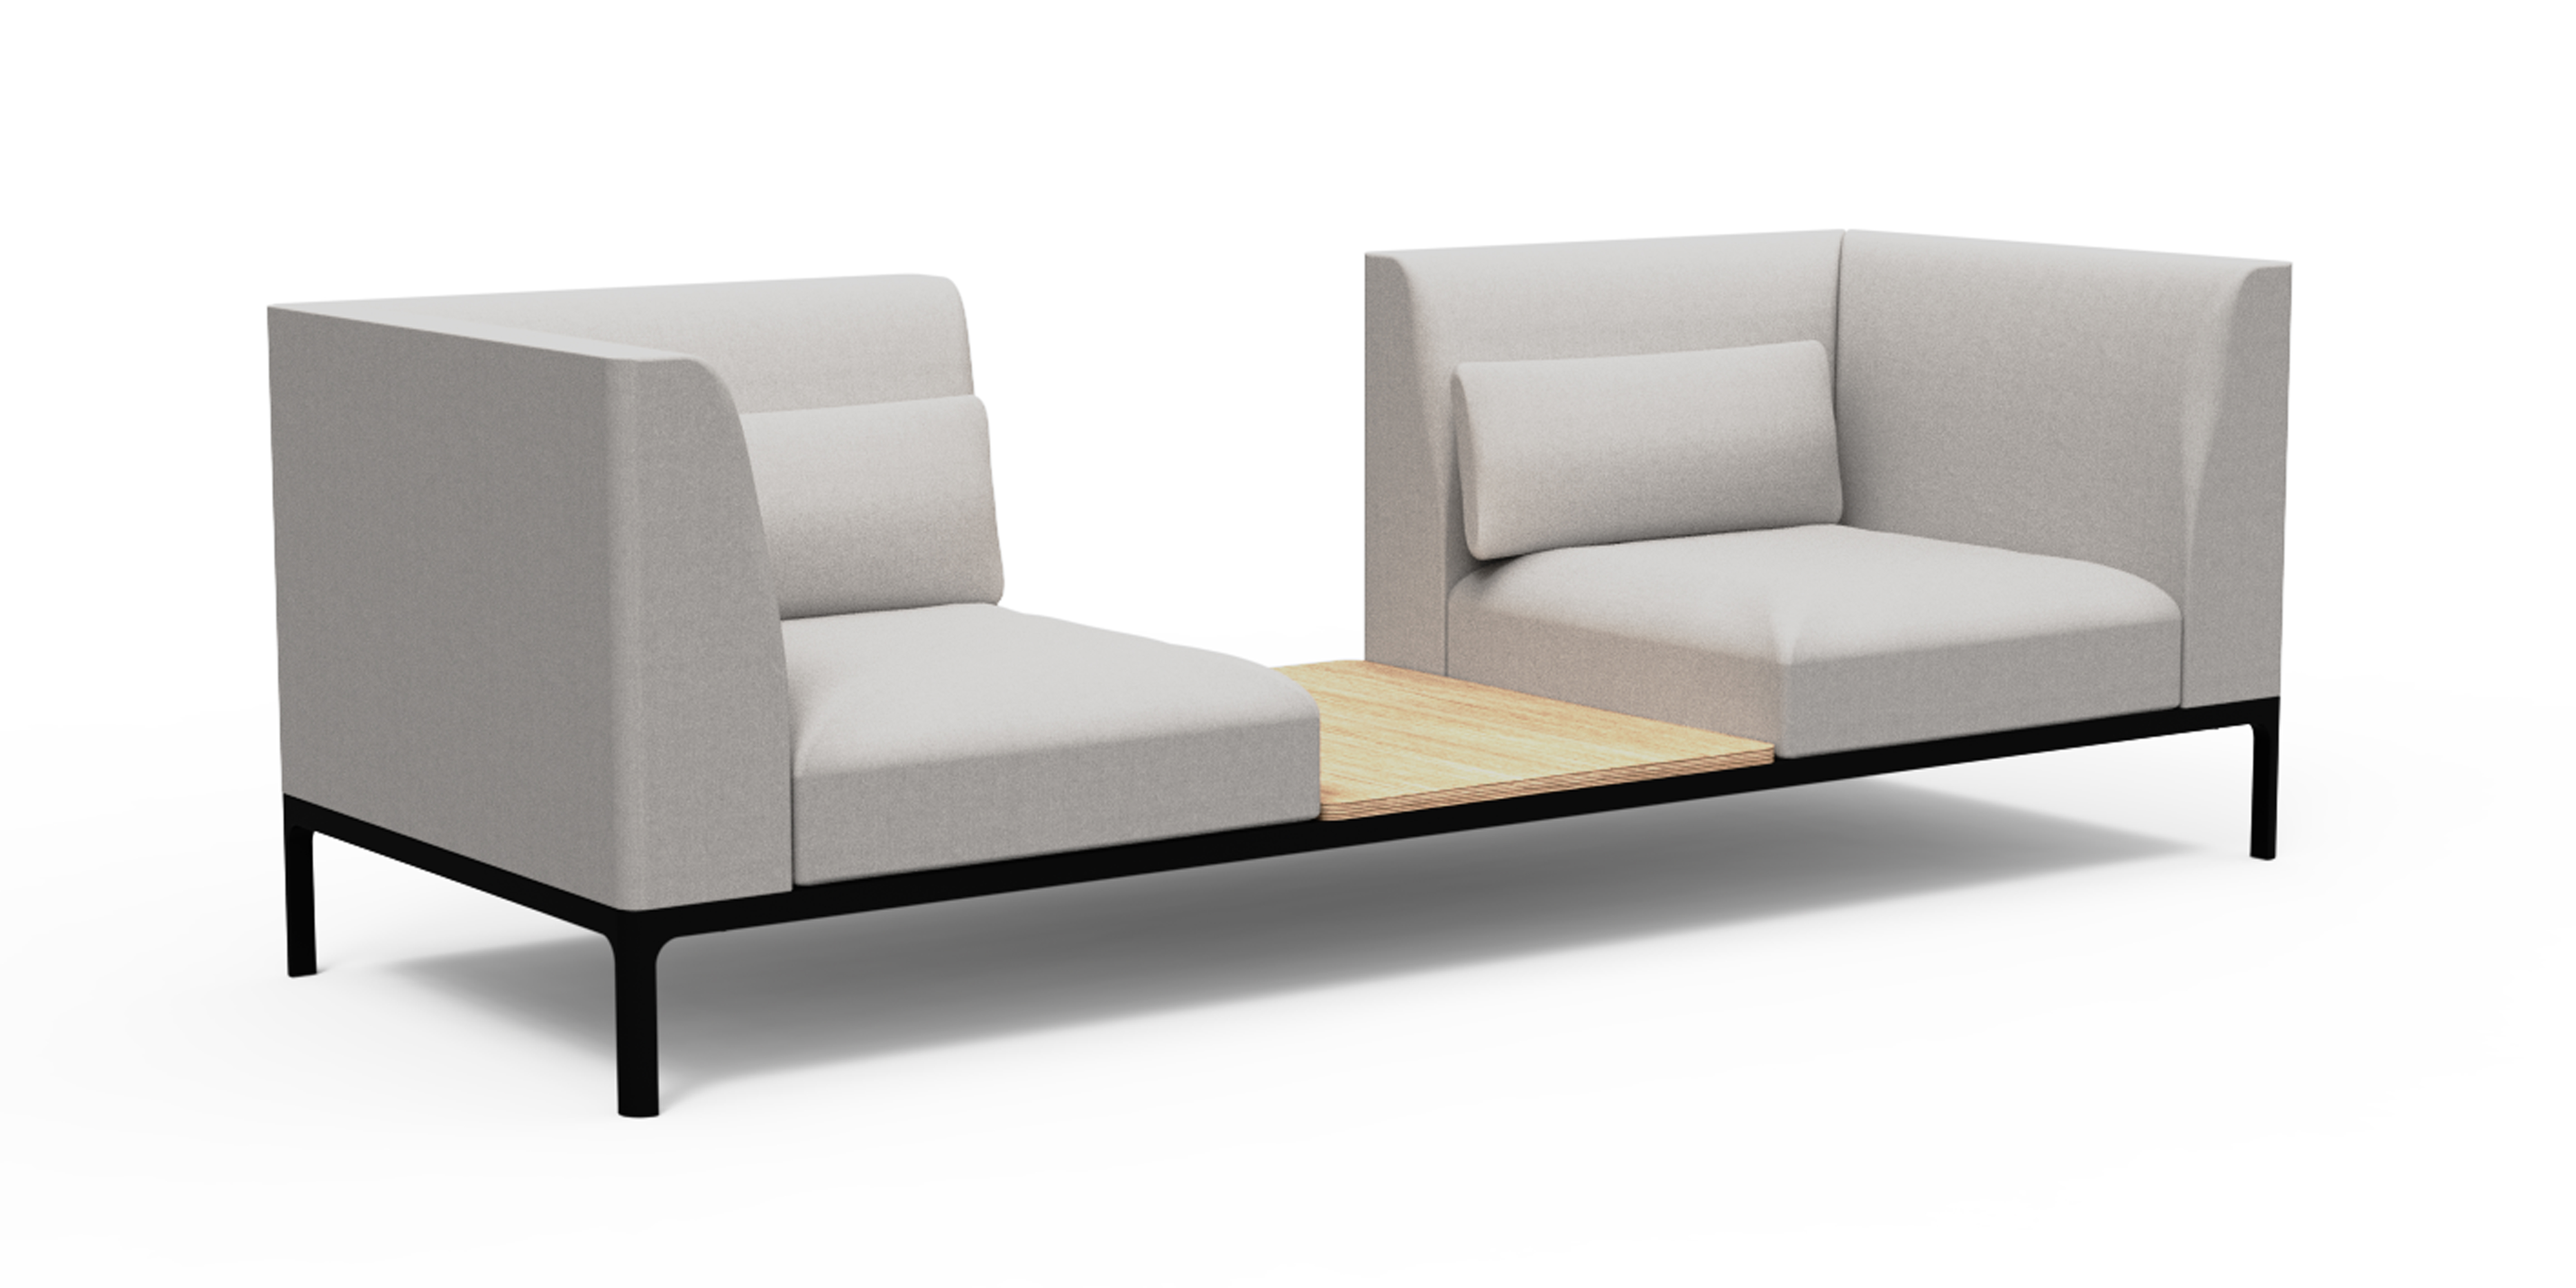 WS - Profile Sofa - 3 seater with center table (Light grey)